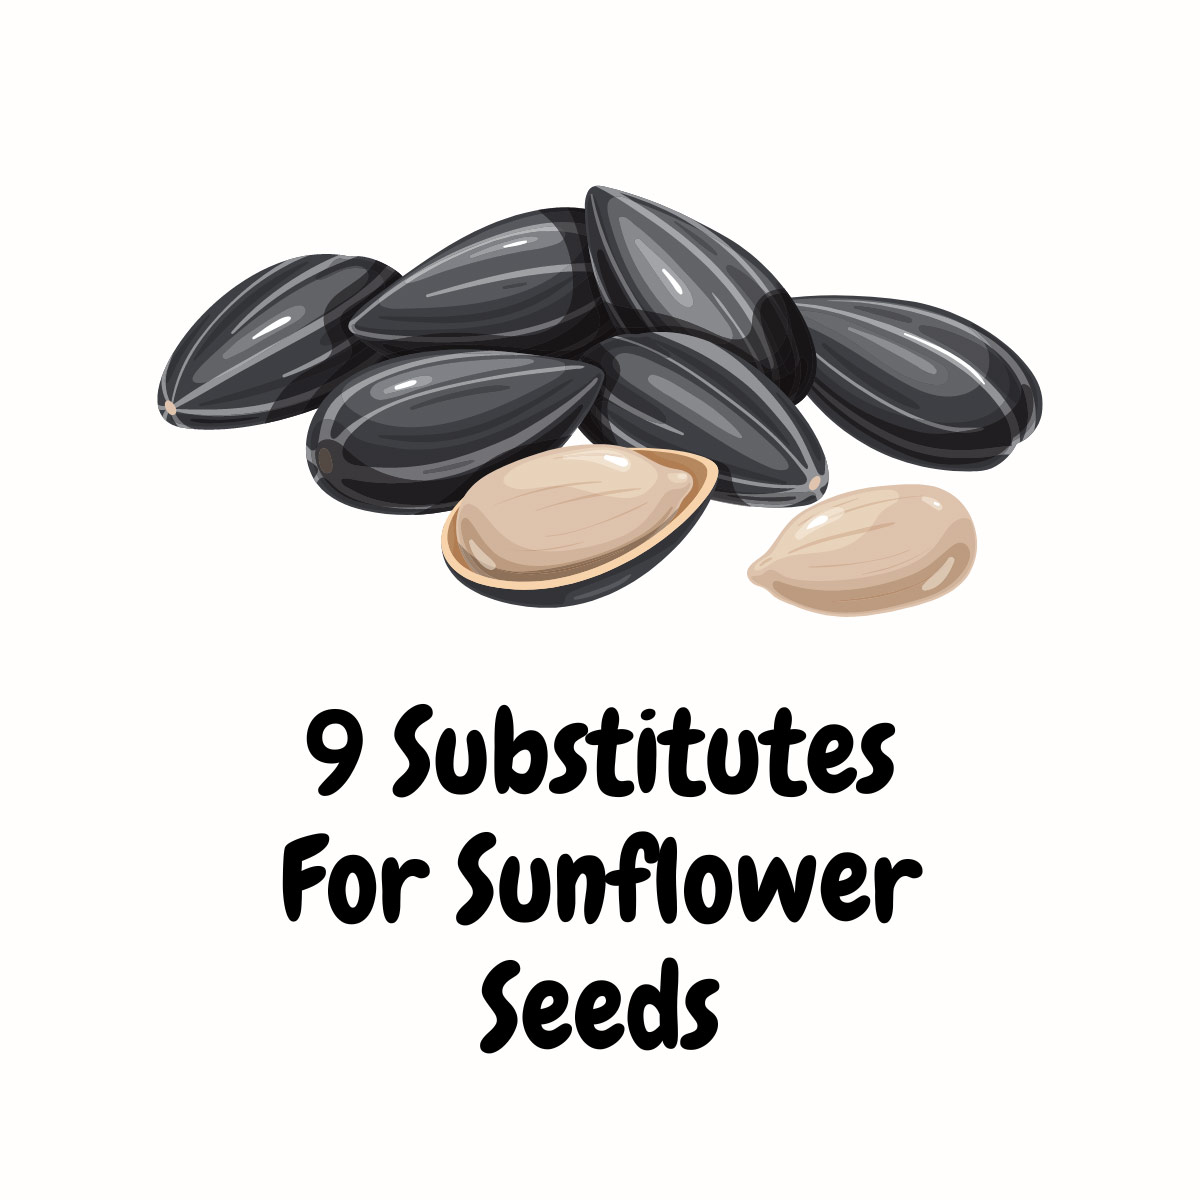 Substitutes For Sunflower Seeds featured image | Girl Meets Food